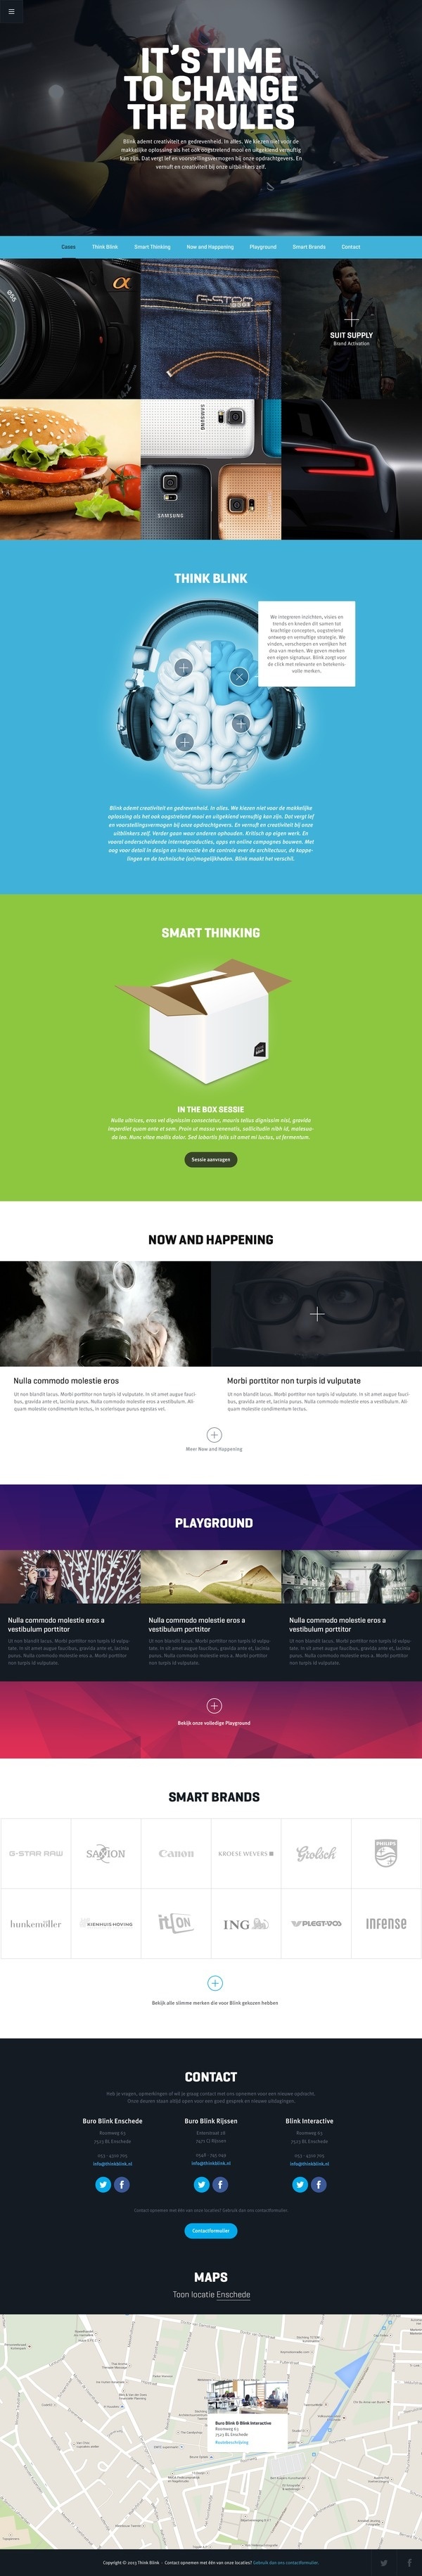 Homepages design idea #192: Think index #homepage #web